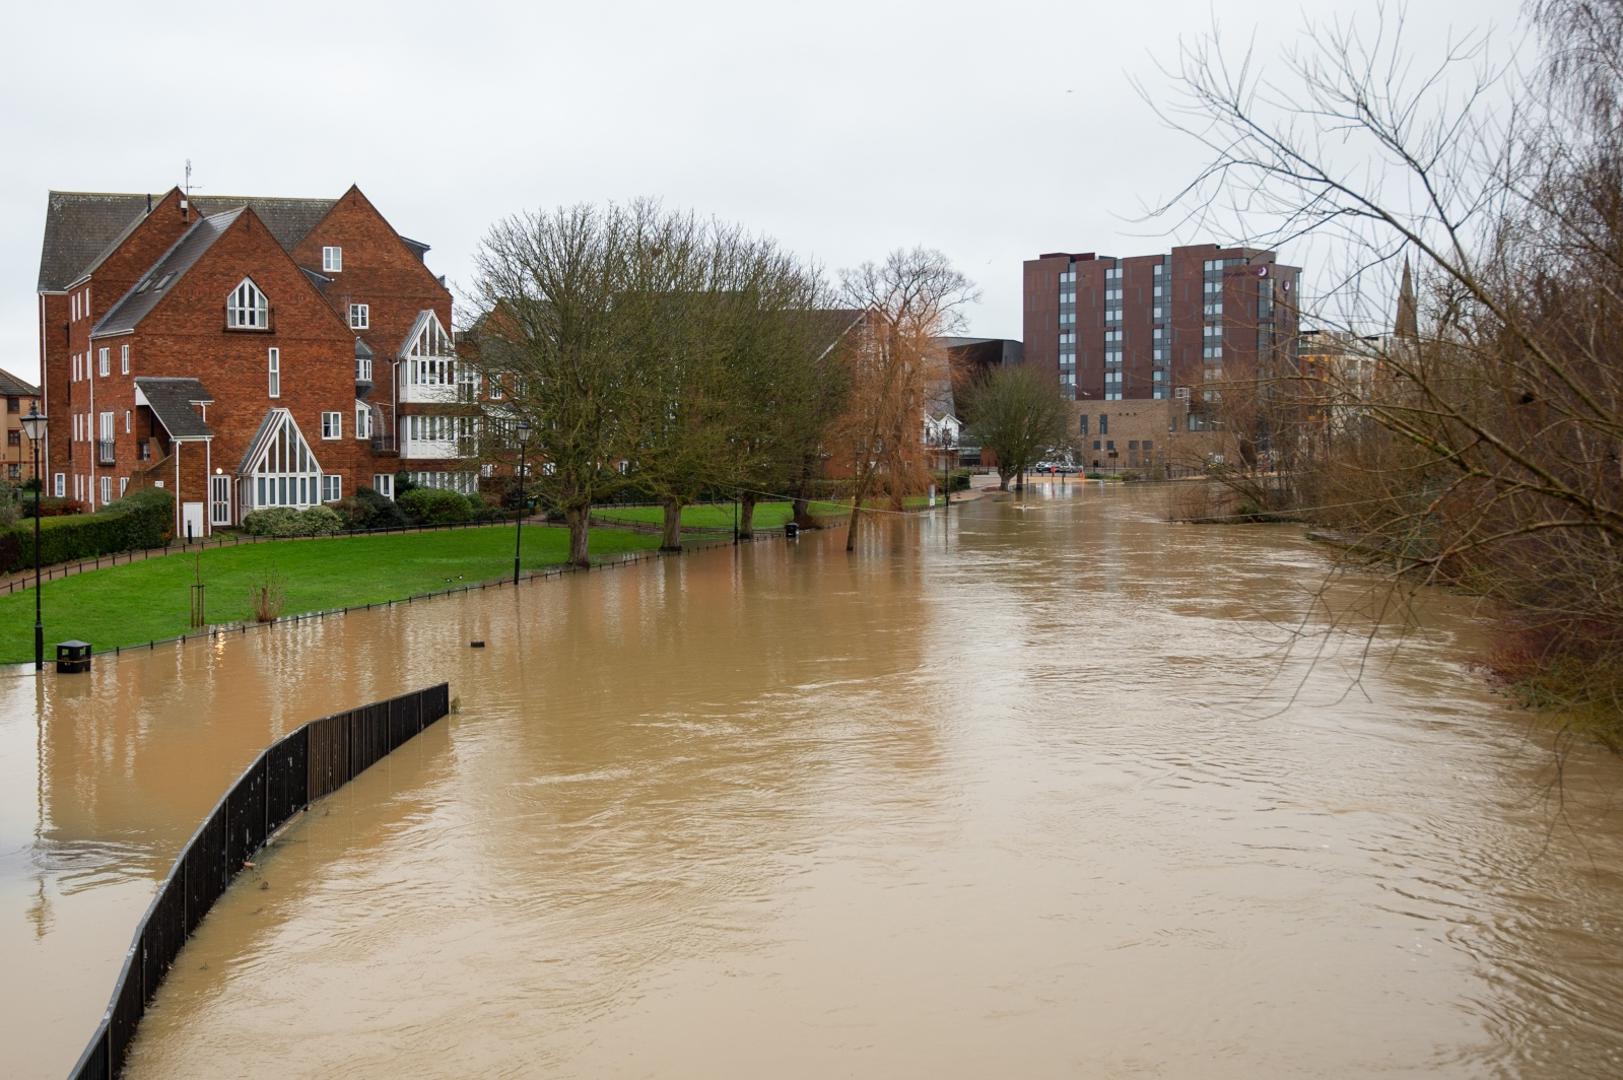 Winter weather Dec 26th 2020 Flooding in Bedford where the River Great Ouse has burst its banks, after residents living near the river in north Bedfordshire were "strongly urged" to seek alternative accommodation due to fears of flooding. Joe Giddens  Photo: PA Images/PIXSELL